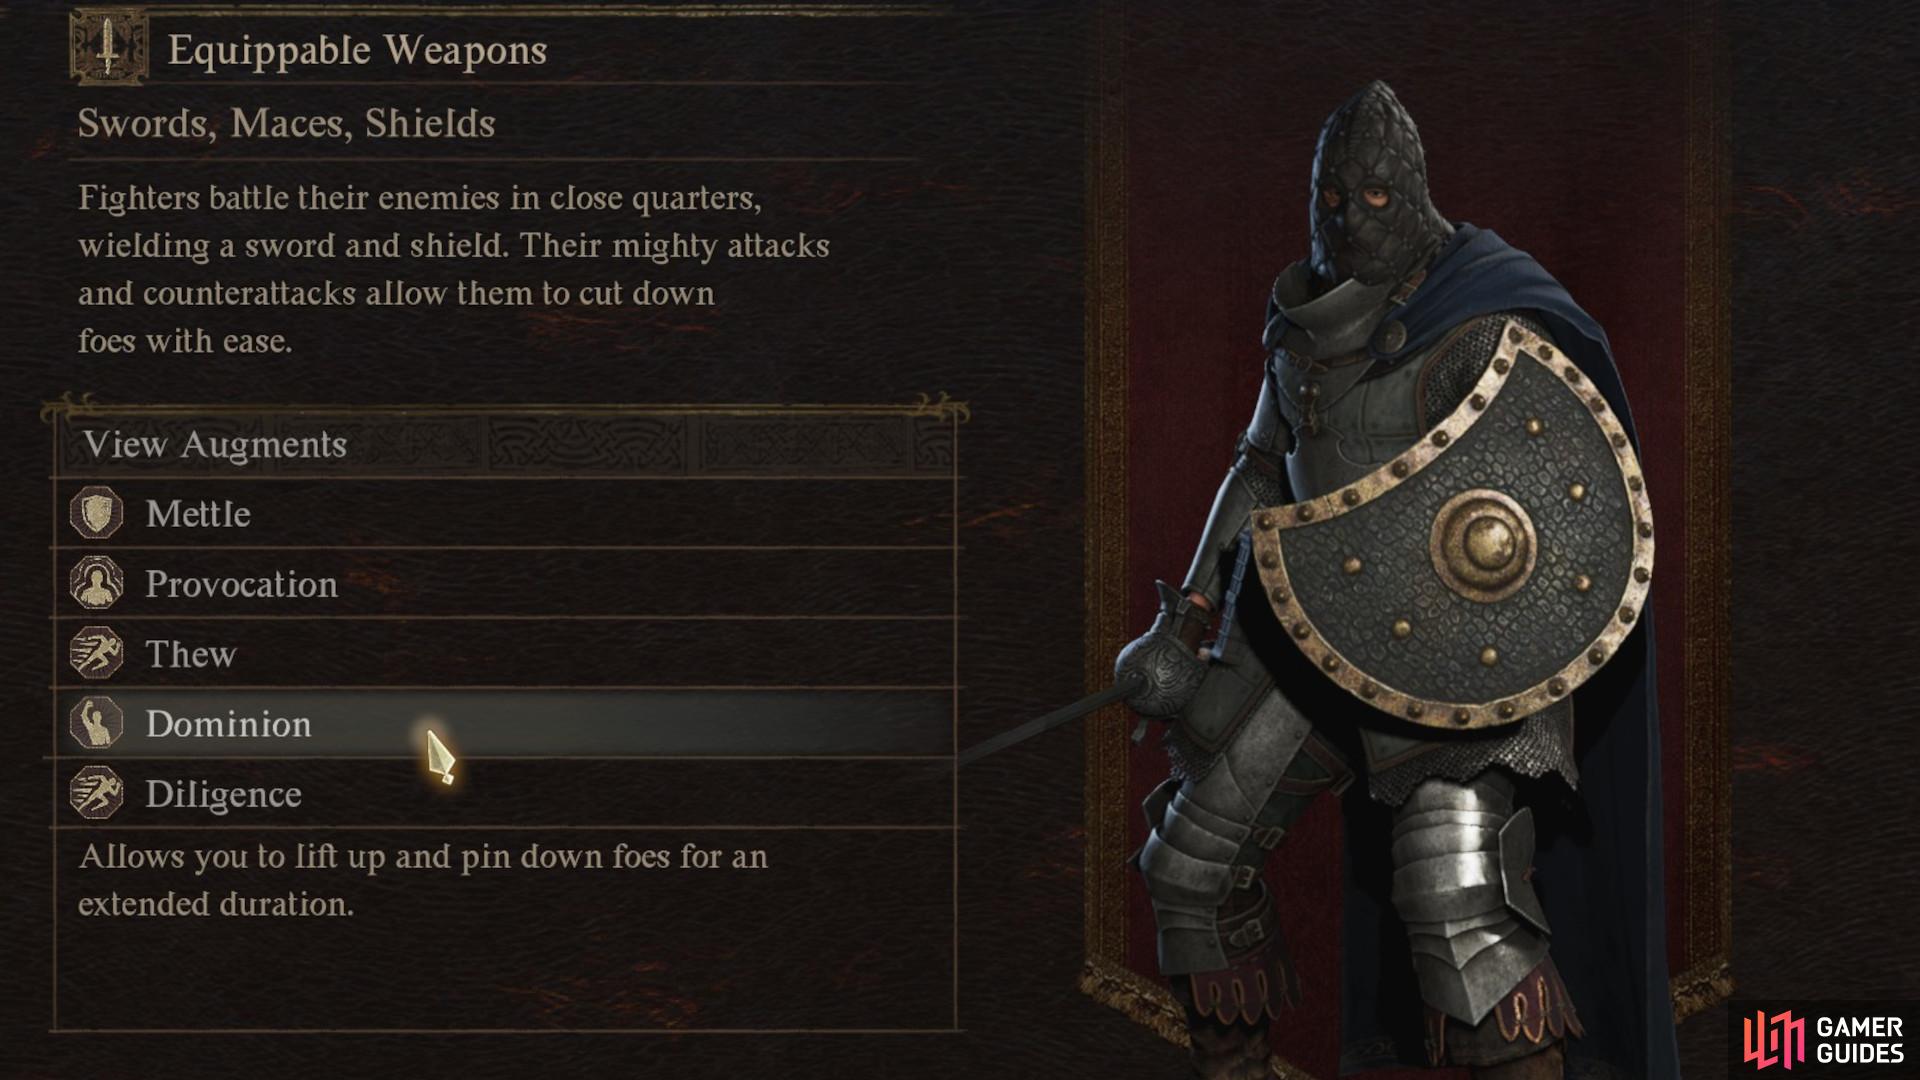 Here is a list of Fighter Augments and what to expect from them in Dragon’s Dogma 2.